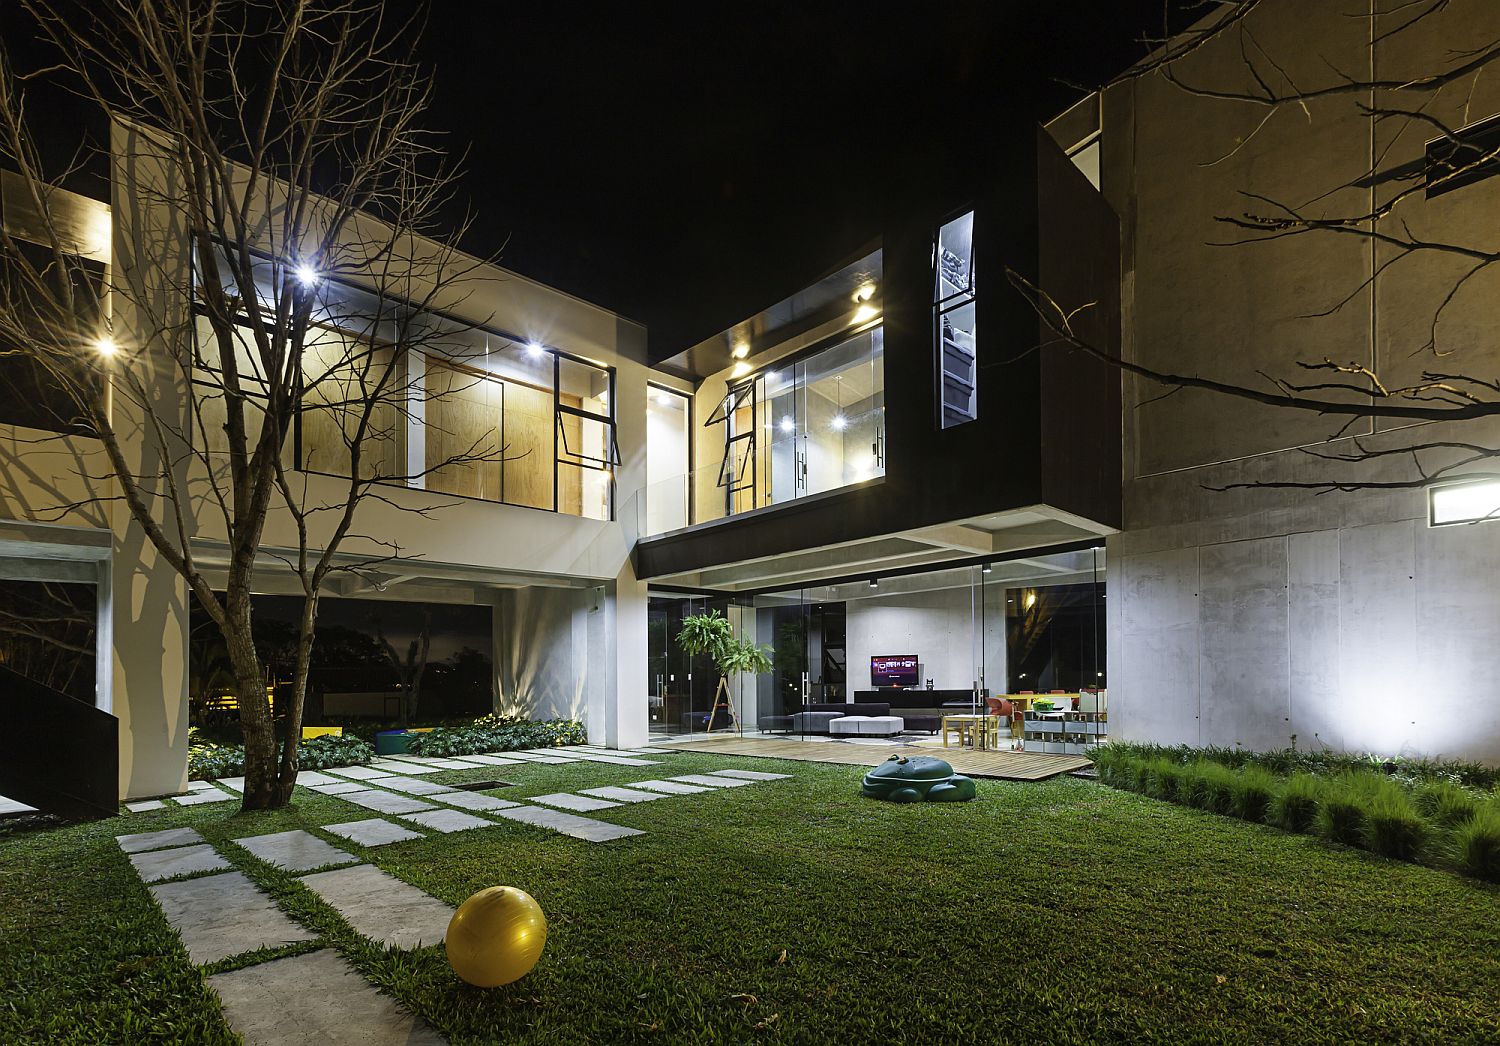 Lighting-and-open-spaces-create-a-smart-urban-oasis-full-of-greenery